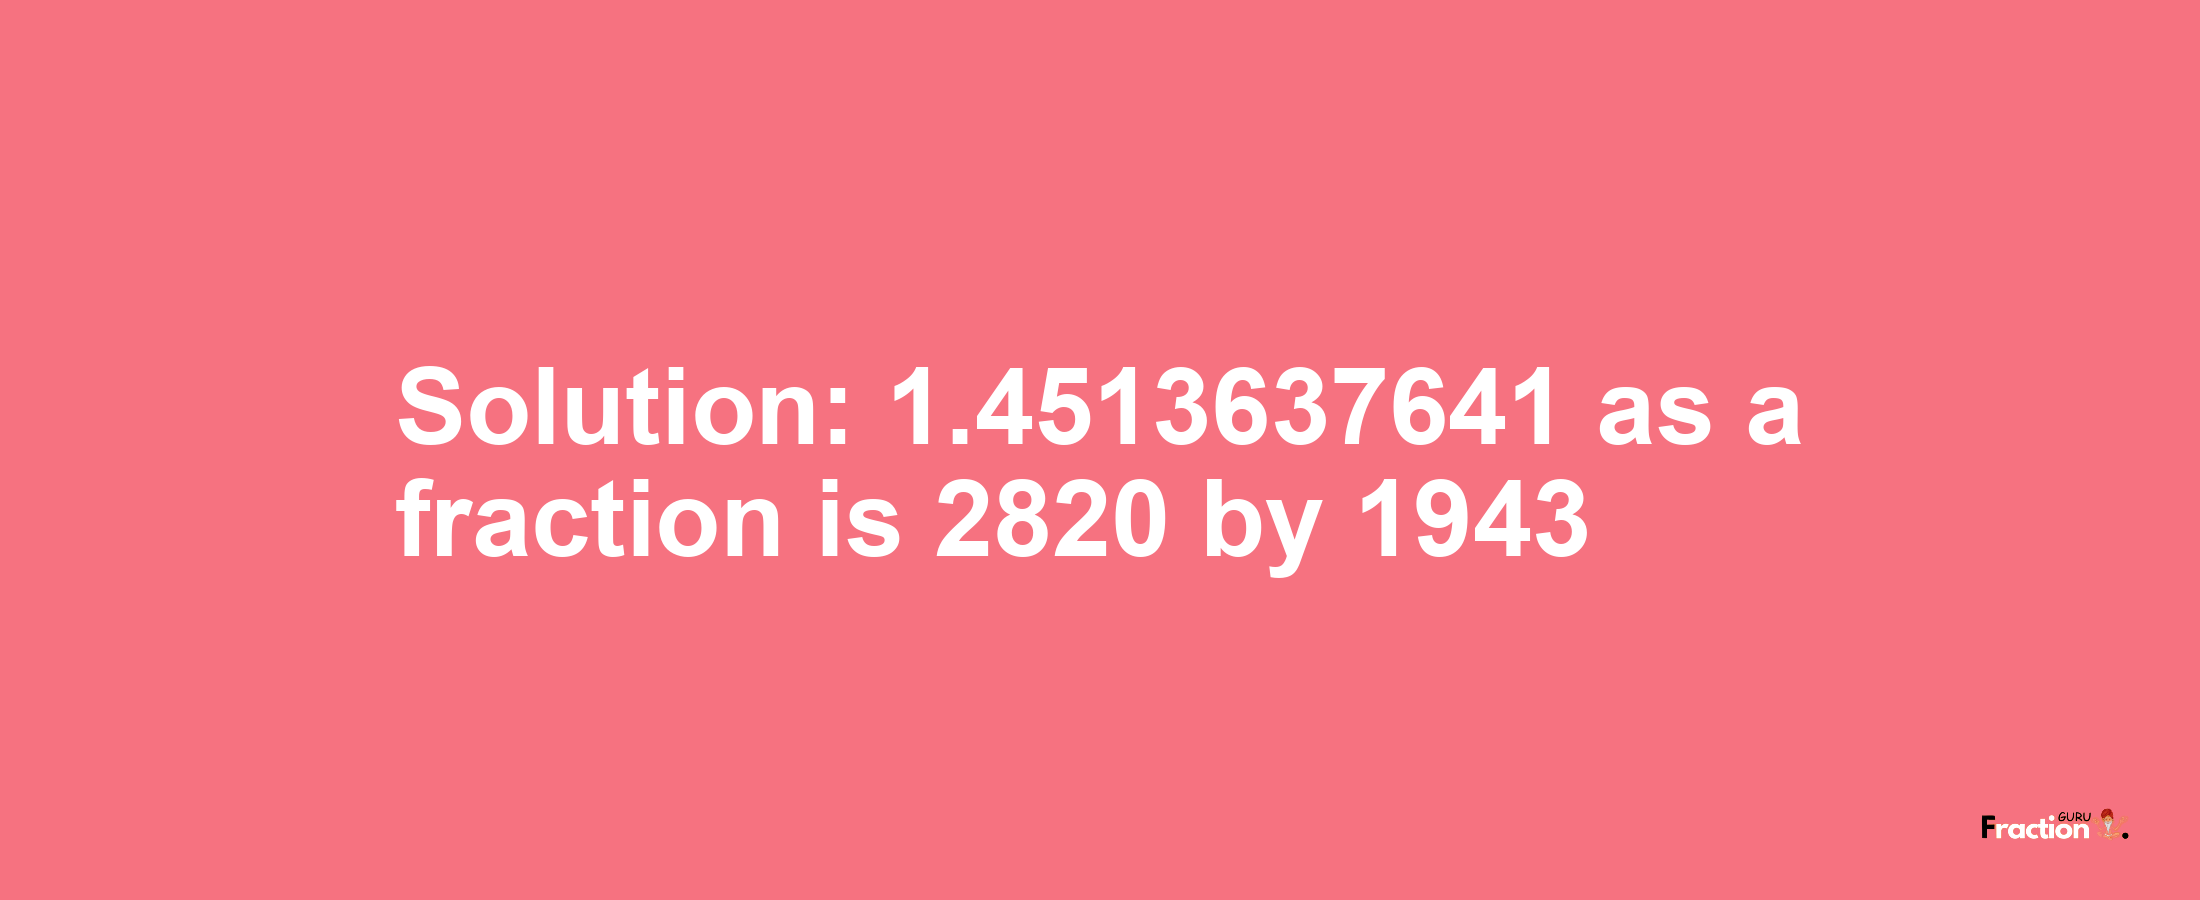 Solution:1.4513637641 as a fraction is 2820/1943